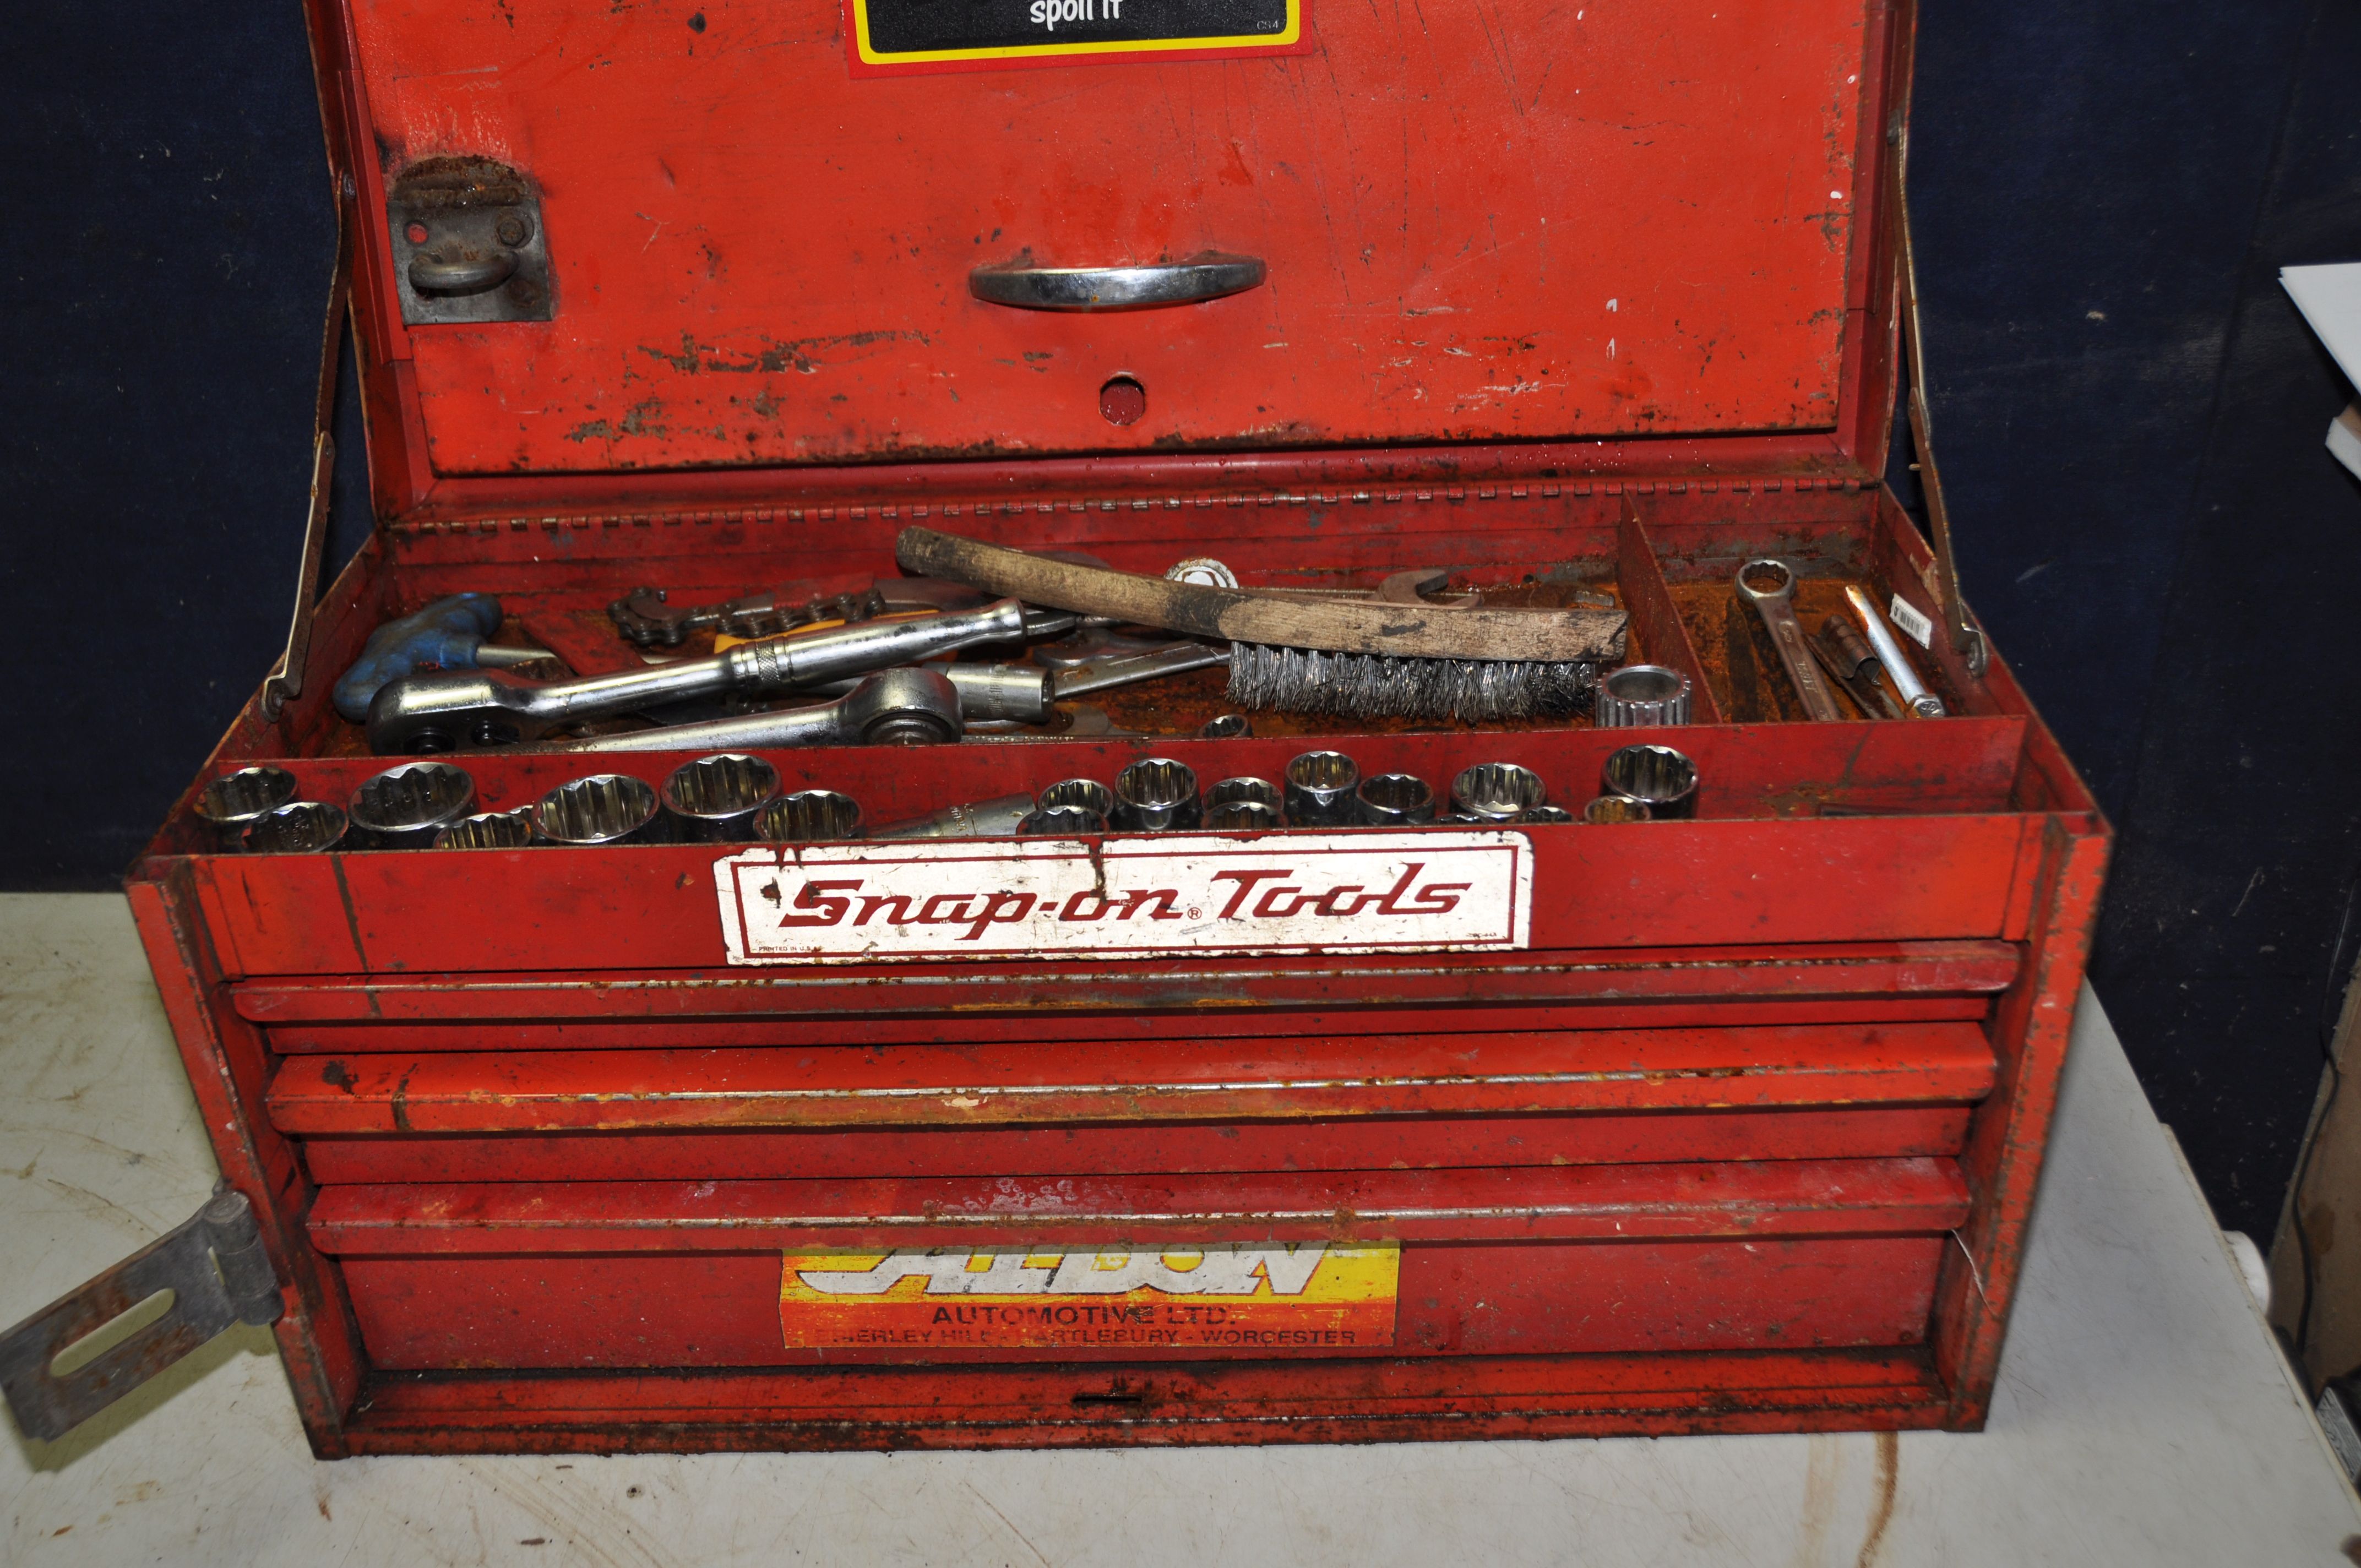 A MECHANICS TOOLBOX BADGED SNAP ON TOOLS containing Halfords and other metric sockets, rachets, - Image 2 of 6